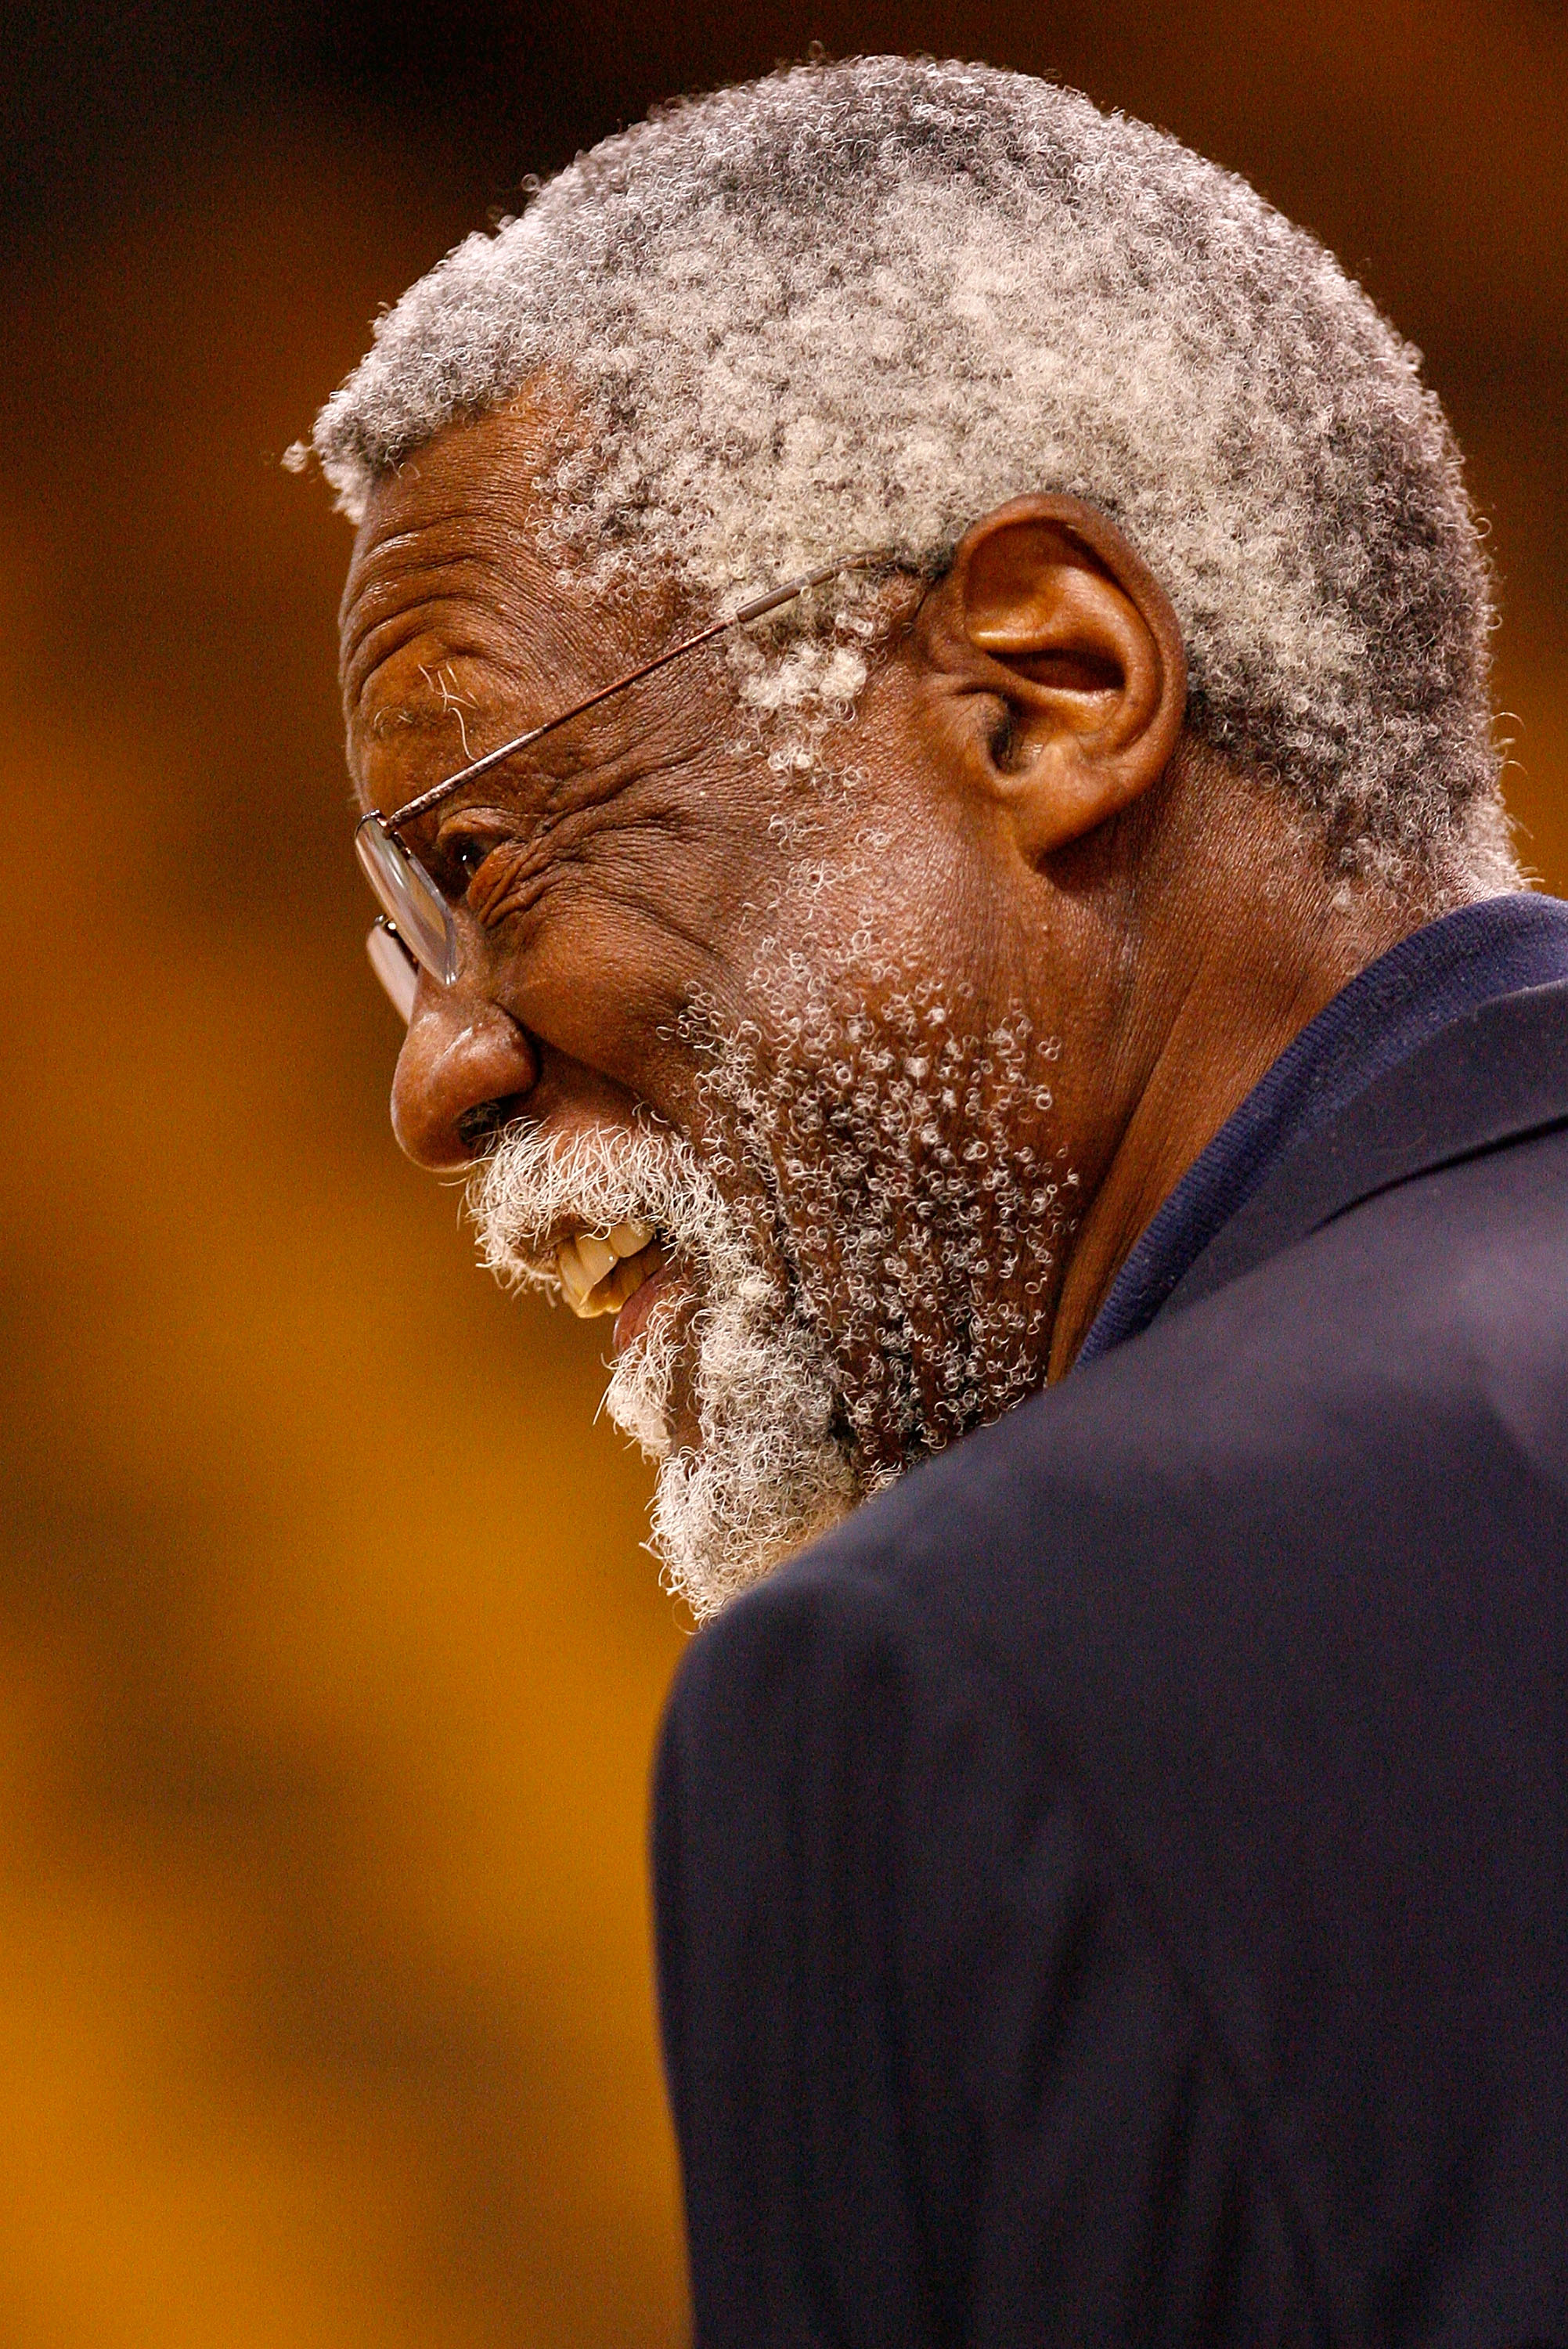 BOSTON - JUNE 17:  NBA legend Bill Russell smiles before Game Six of the 2008 NBA Finals between the Los Angeles Lakers and the Boston Celtics on June 17, 2008 at TD Banknorth Garden in Boston, Massachusetts. NOTE TO USER: User expressly acknowledges and